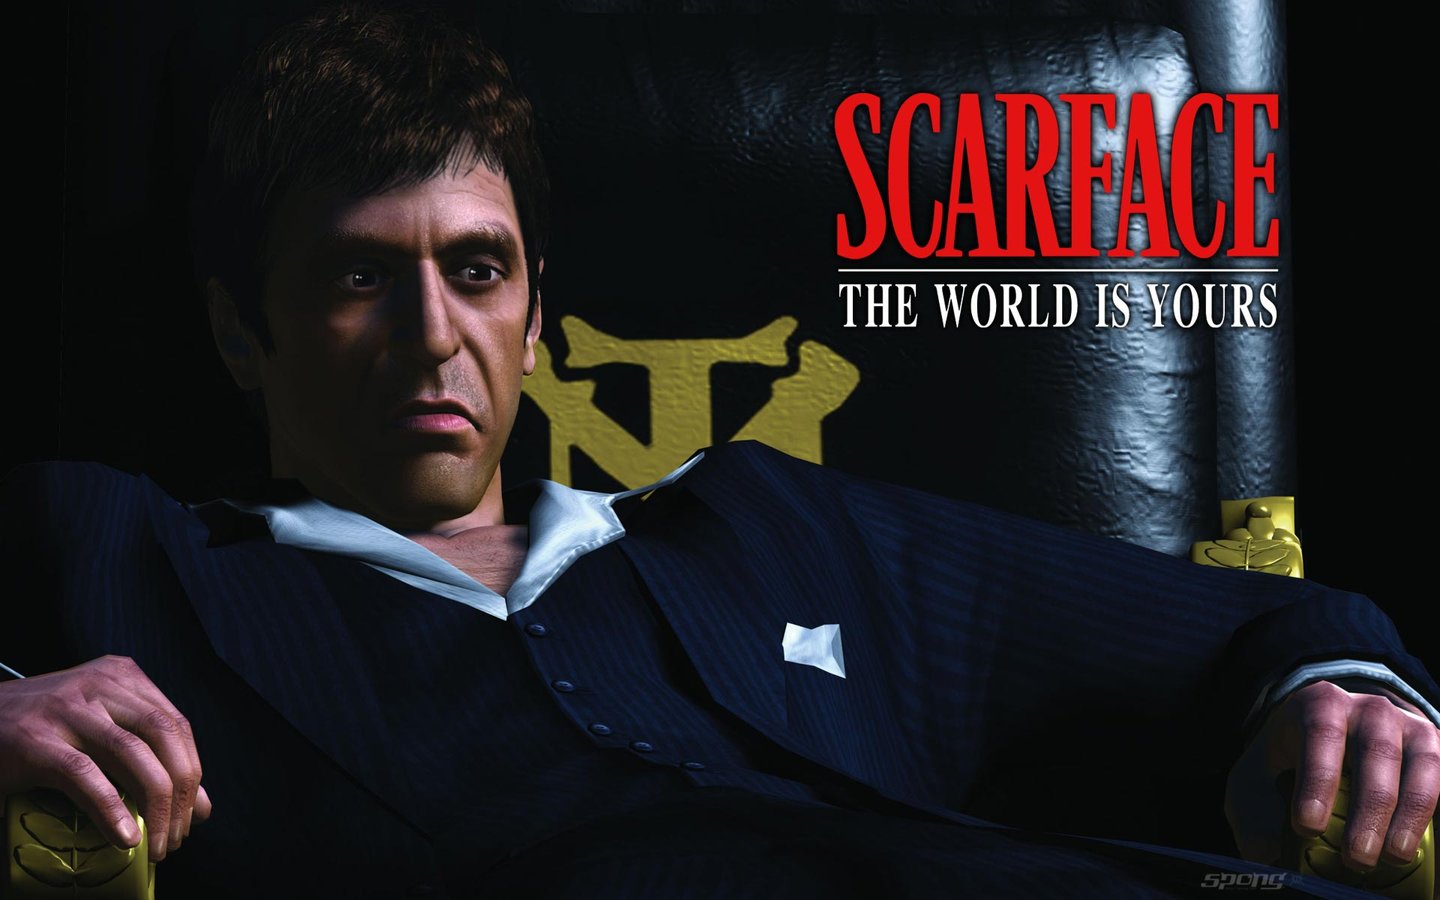 Scarface: The World is Yours - PC Wallpaper